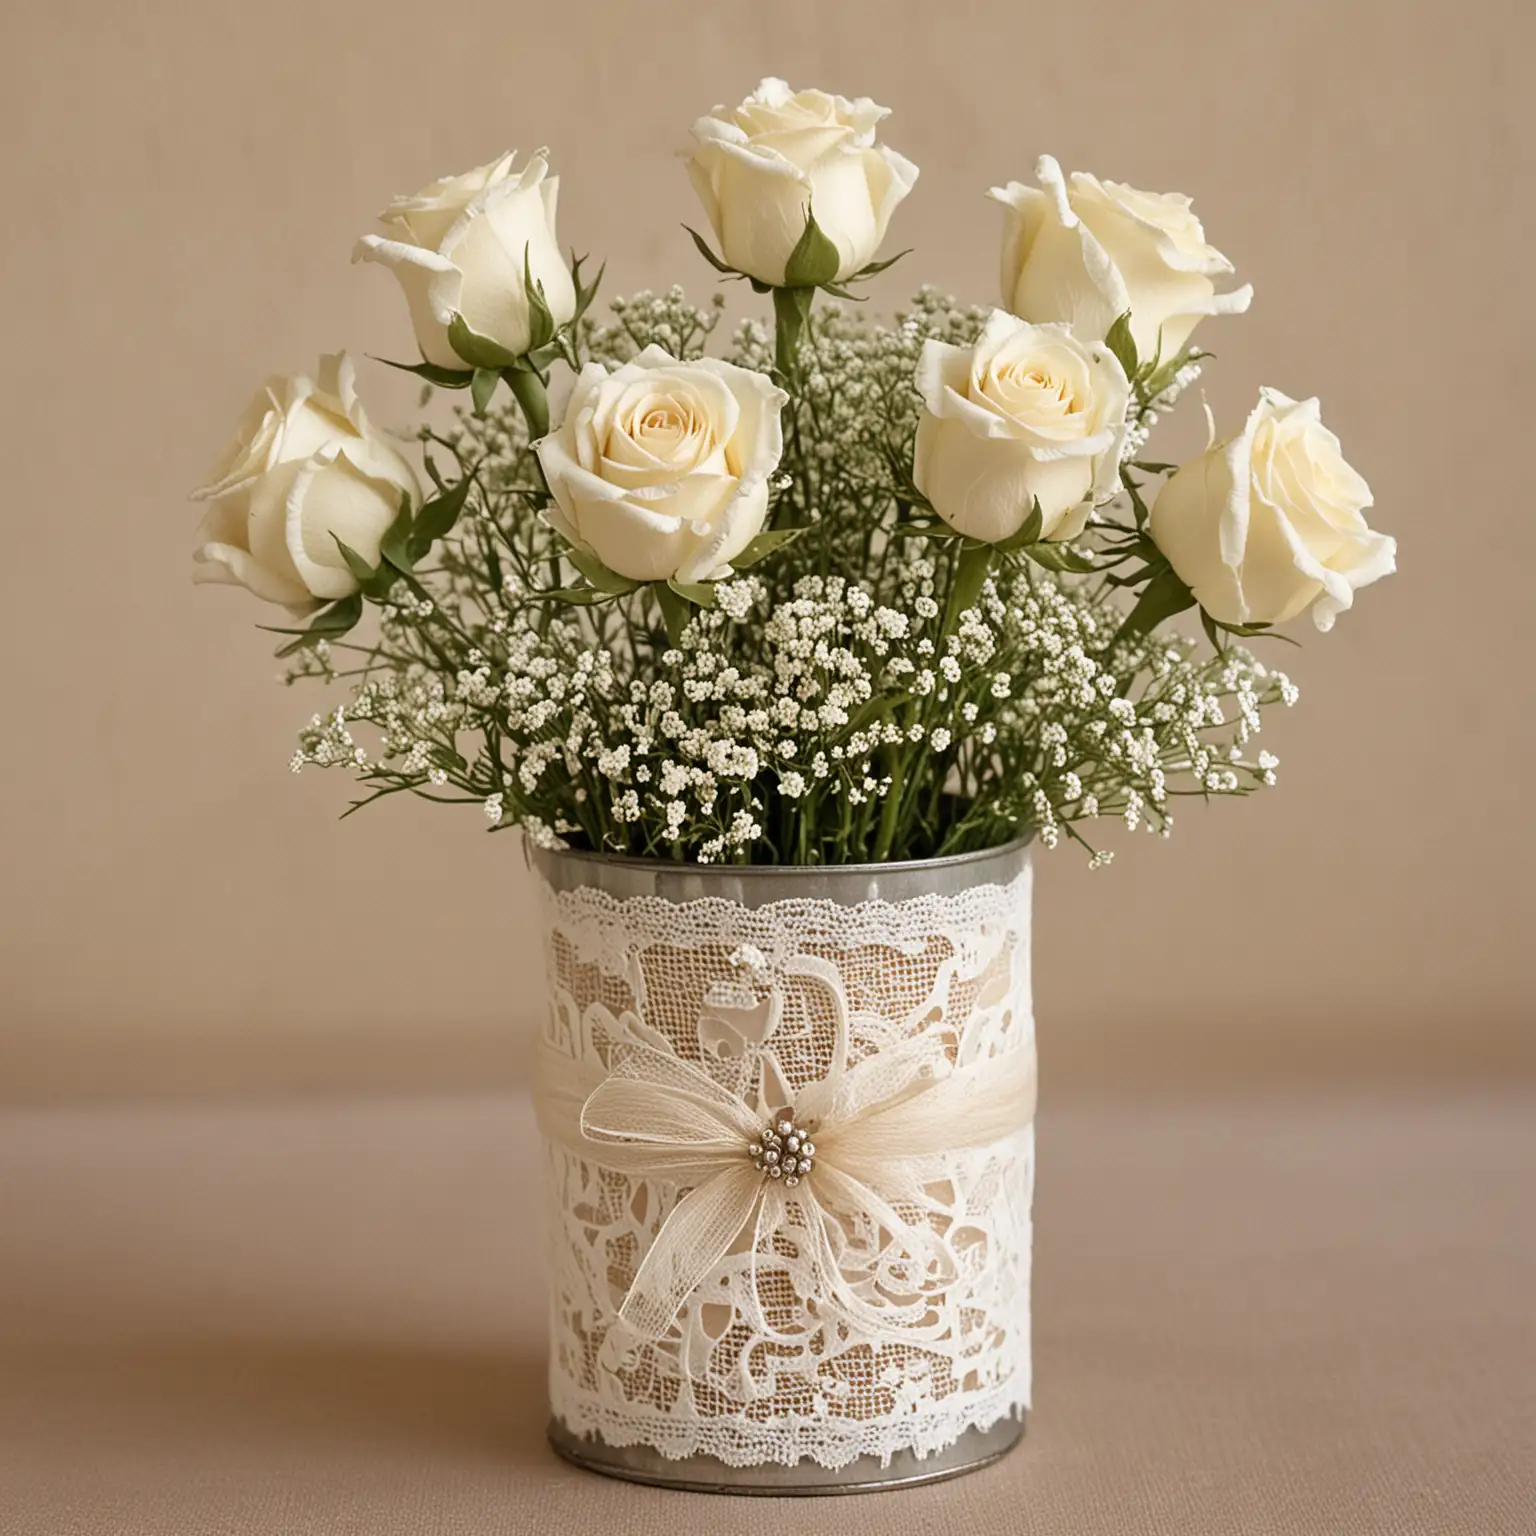 tin can vase painted antique ivoryand wrapped in antique ivory lace and holding ivory roses with a small amount of baby's breath for a simple, vintage centerpiece